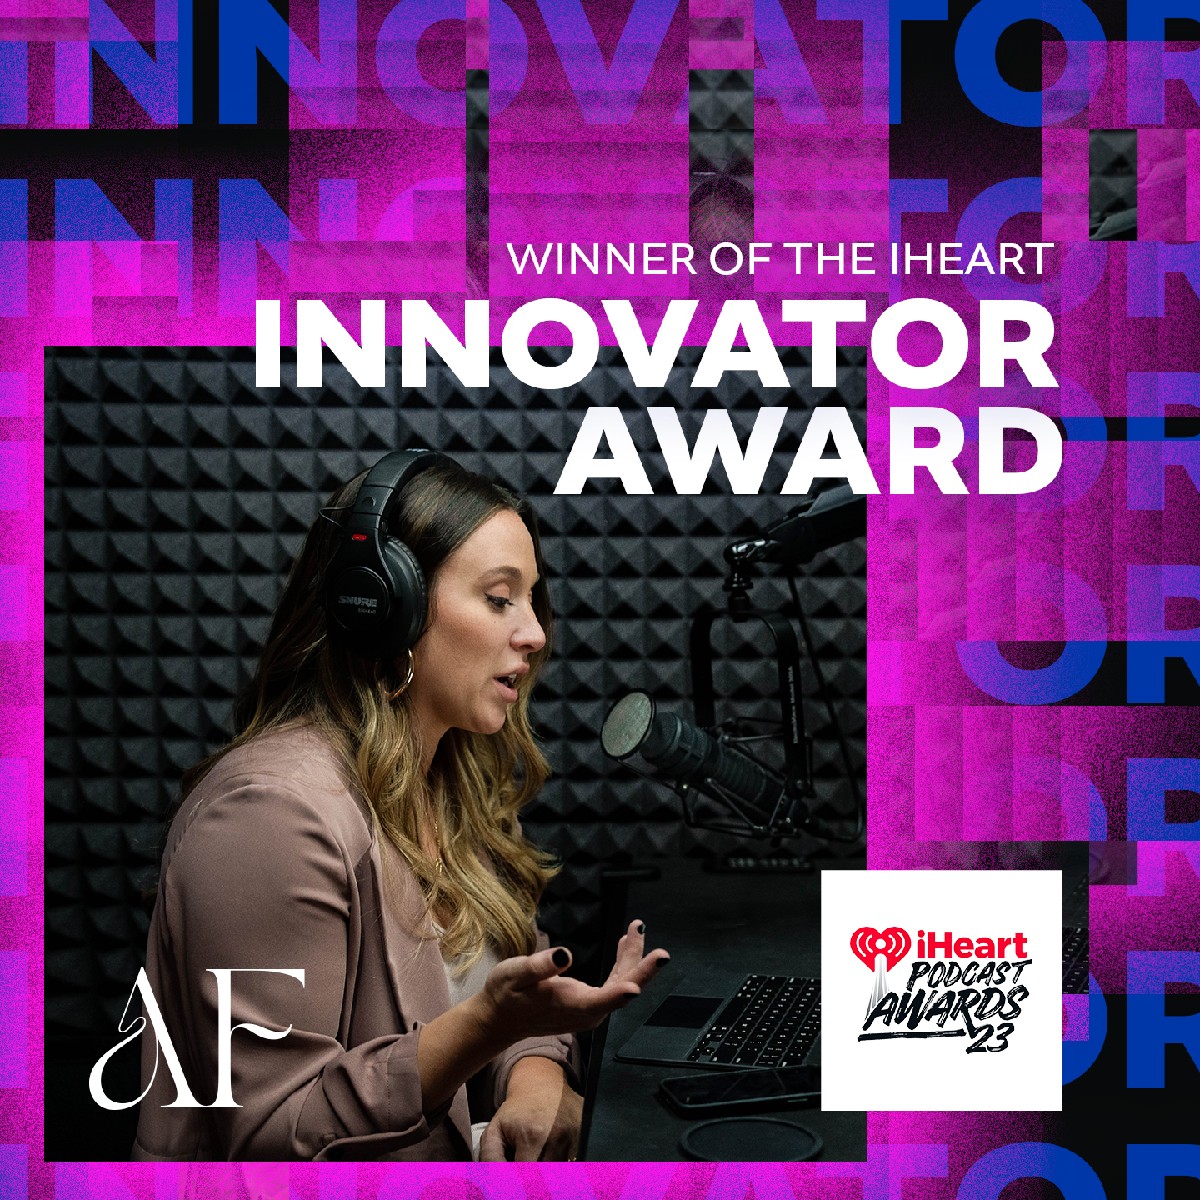 We’re so proud to announce that @Ash_Flowers is the recipient of an iHeart Icon Award- the Innovator Award- at the 2023 iHeart Podcast Awards! 💗 The show streams tonight at 9pm EST on iHeartRadio's YouTube & Facebook! 
#CRIMEJUNKIE #PODCASTOFTHEYEAR #IHEARTPODCASTAWARDS